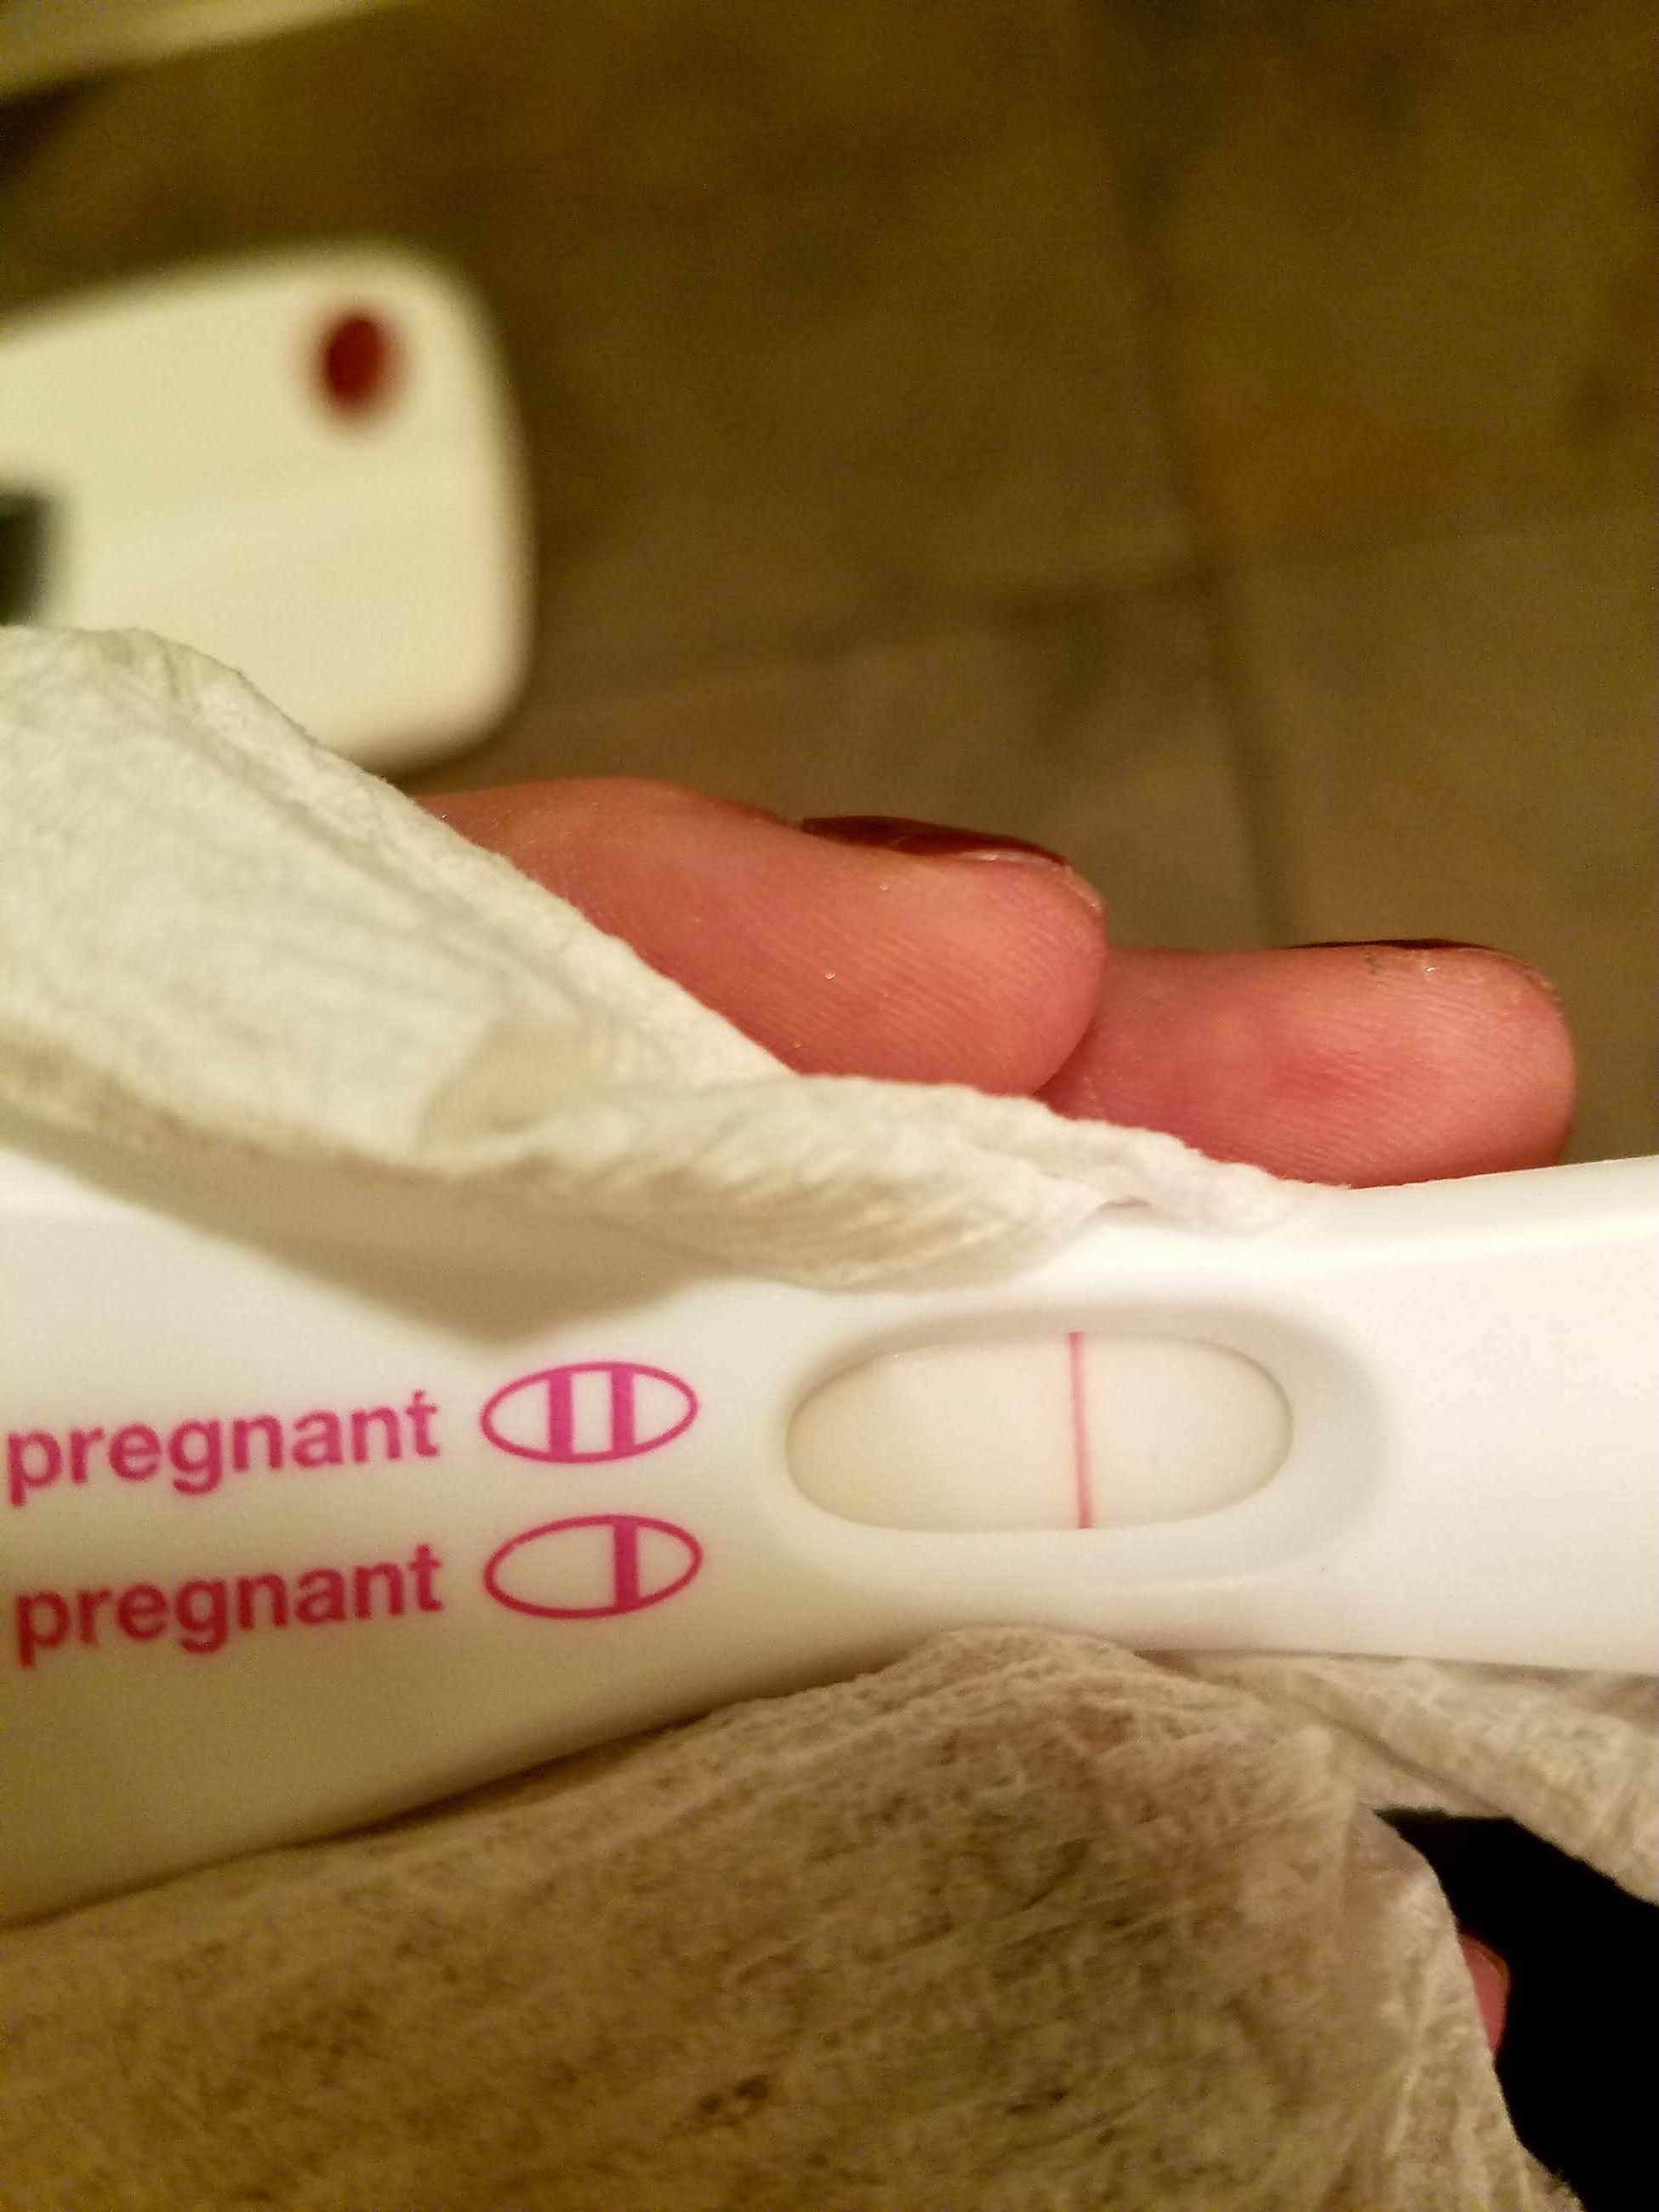 Girlfriend took a pregnancy test and sent me this...